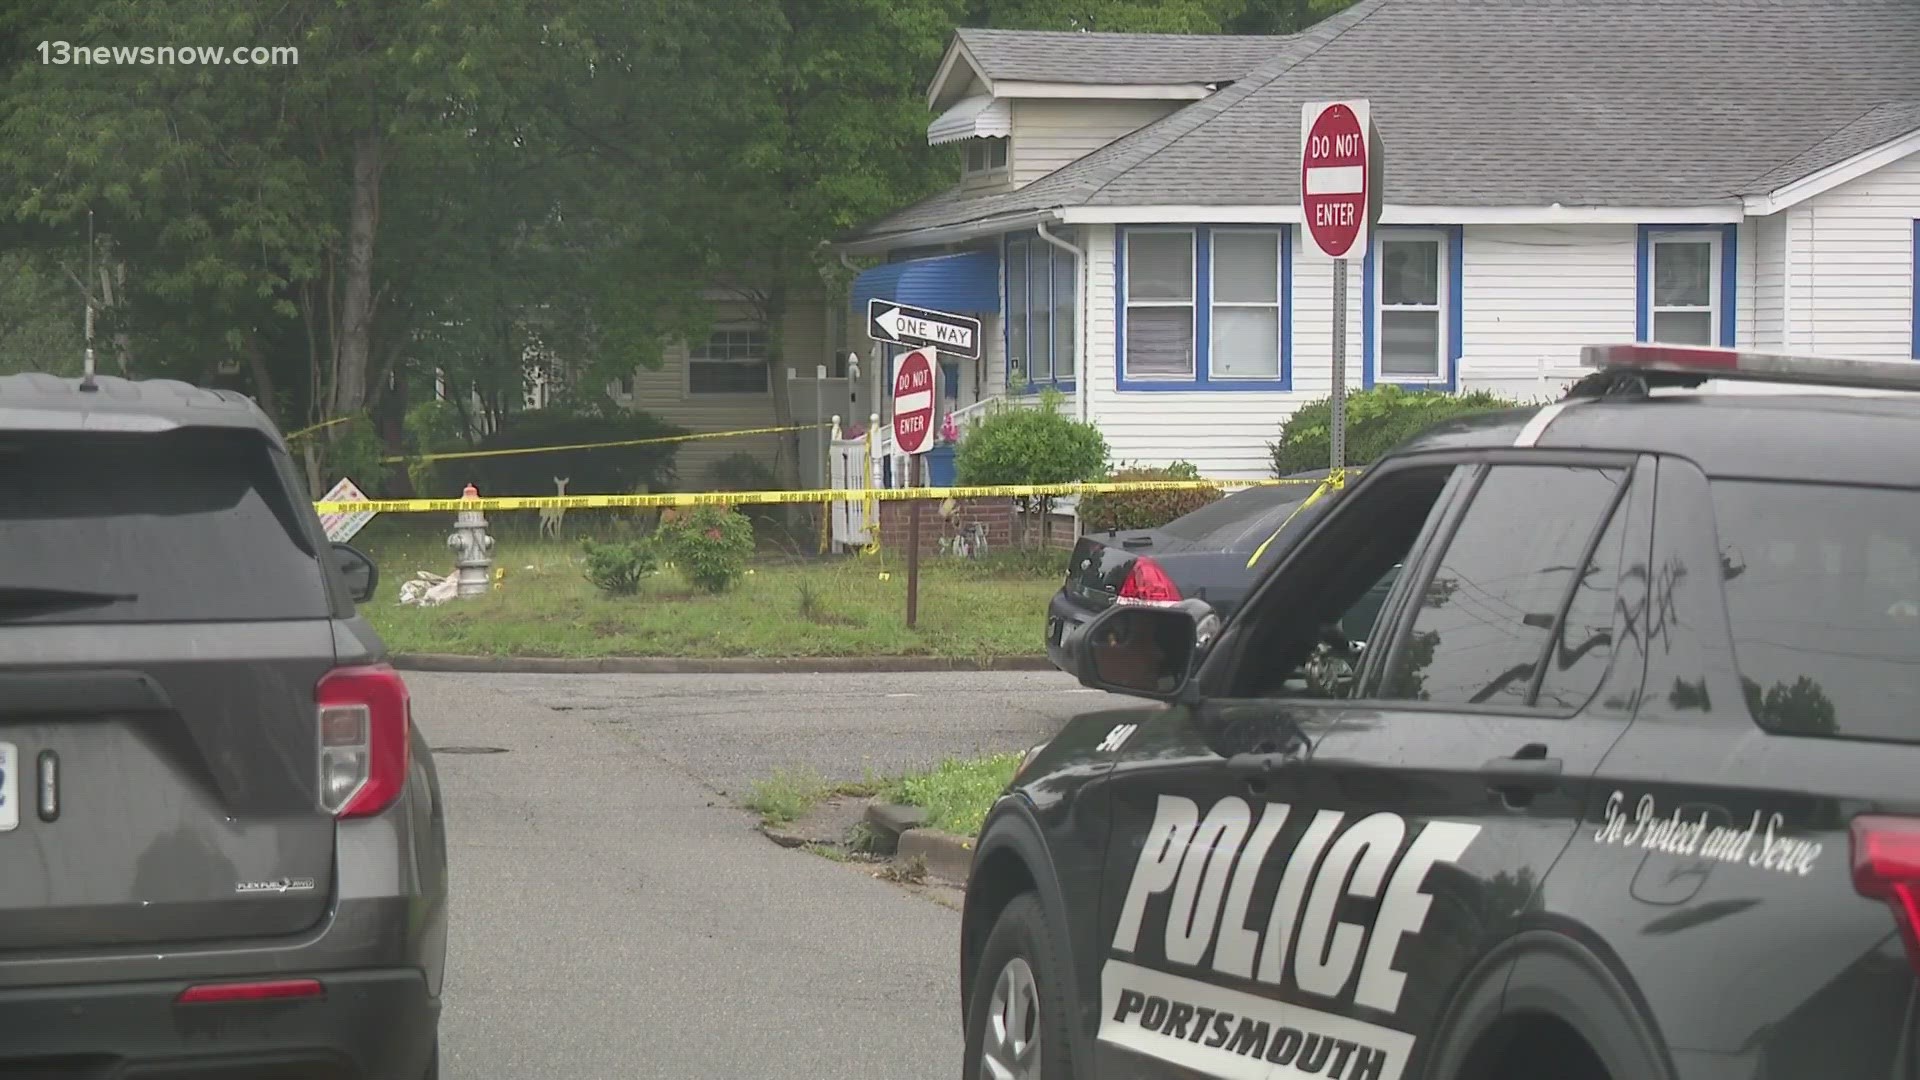 Portsmouth police said the victim's children were in the car at the time of the shooting.